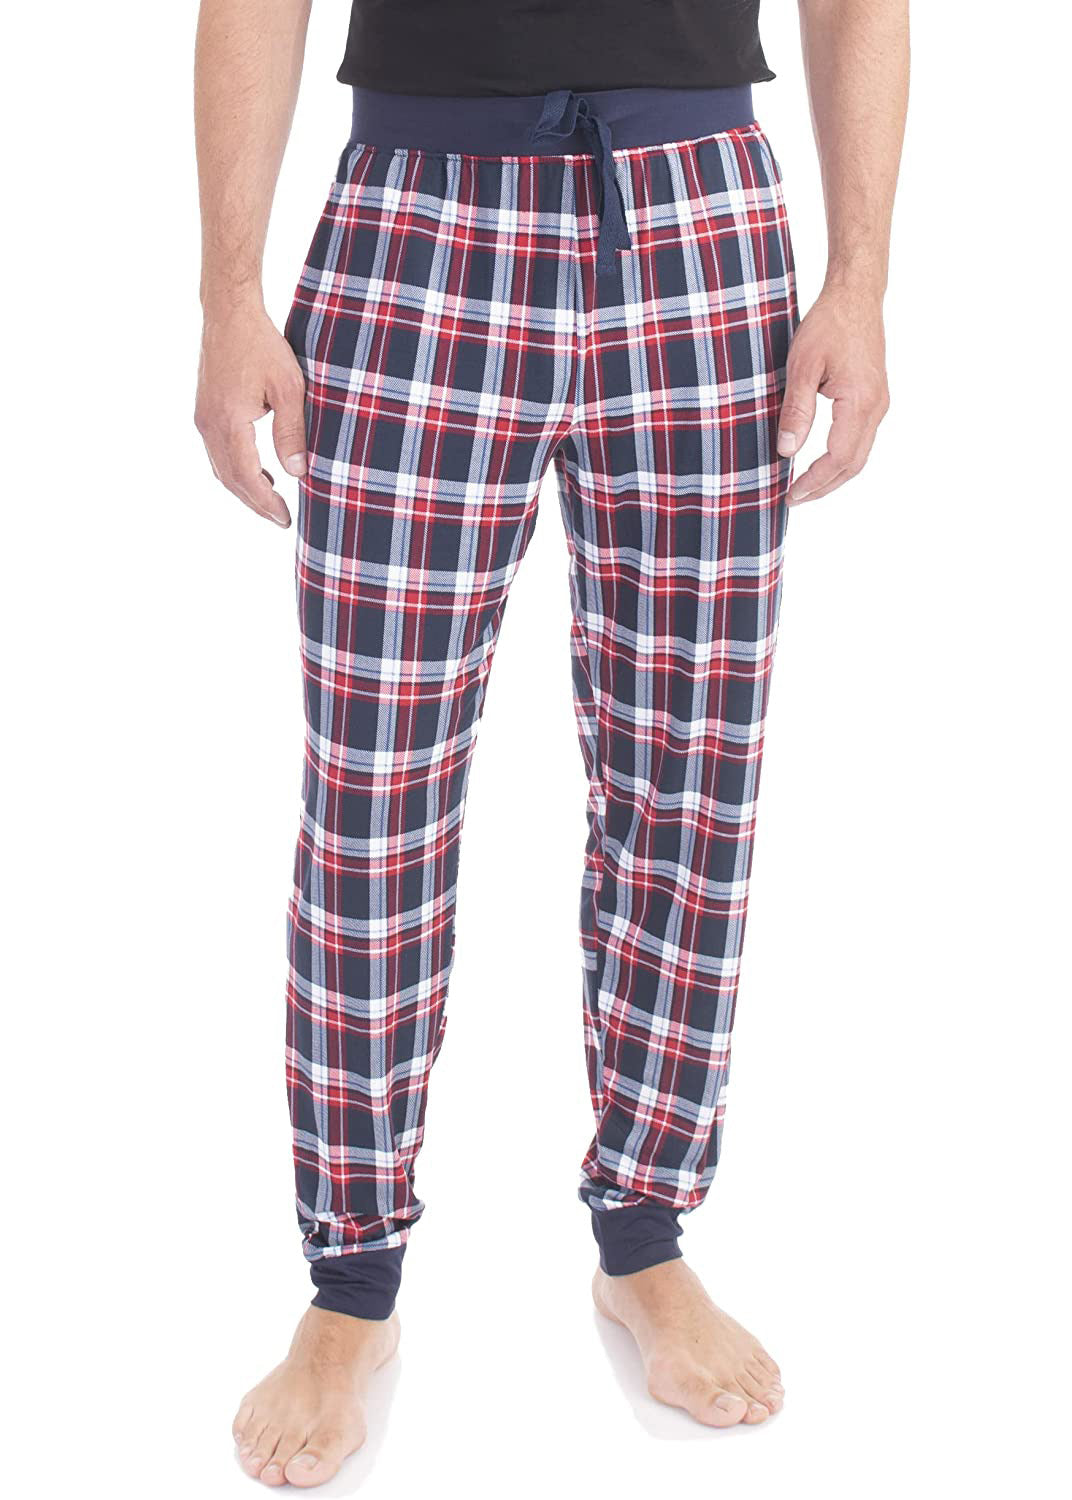 PJ joggers with soft velvety texture, stretch, elastic waistband, drawstring, and stylish ankle cuff. This pattern is a red, navy, white plaid. it has navy waist and drawstring. 